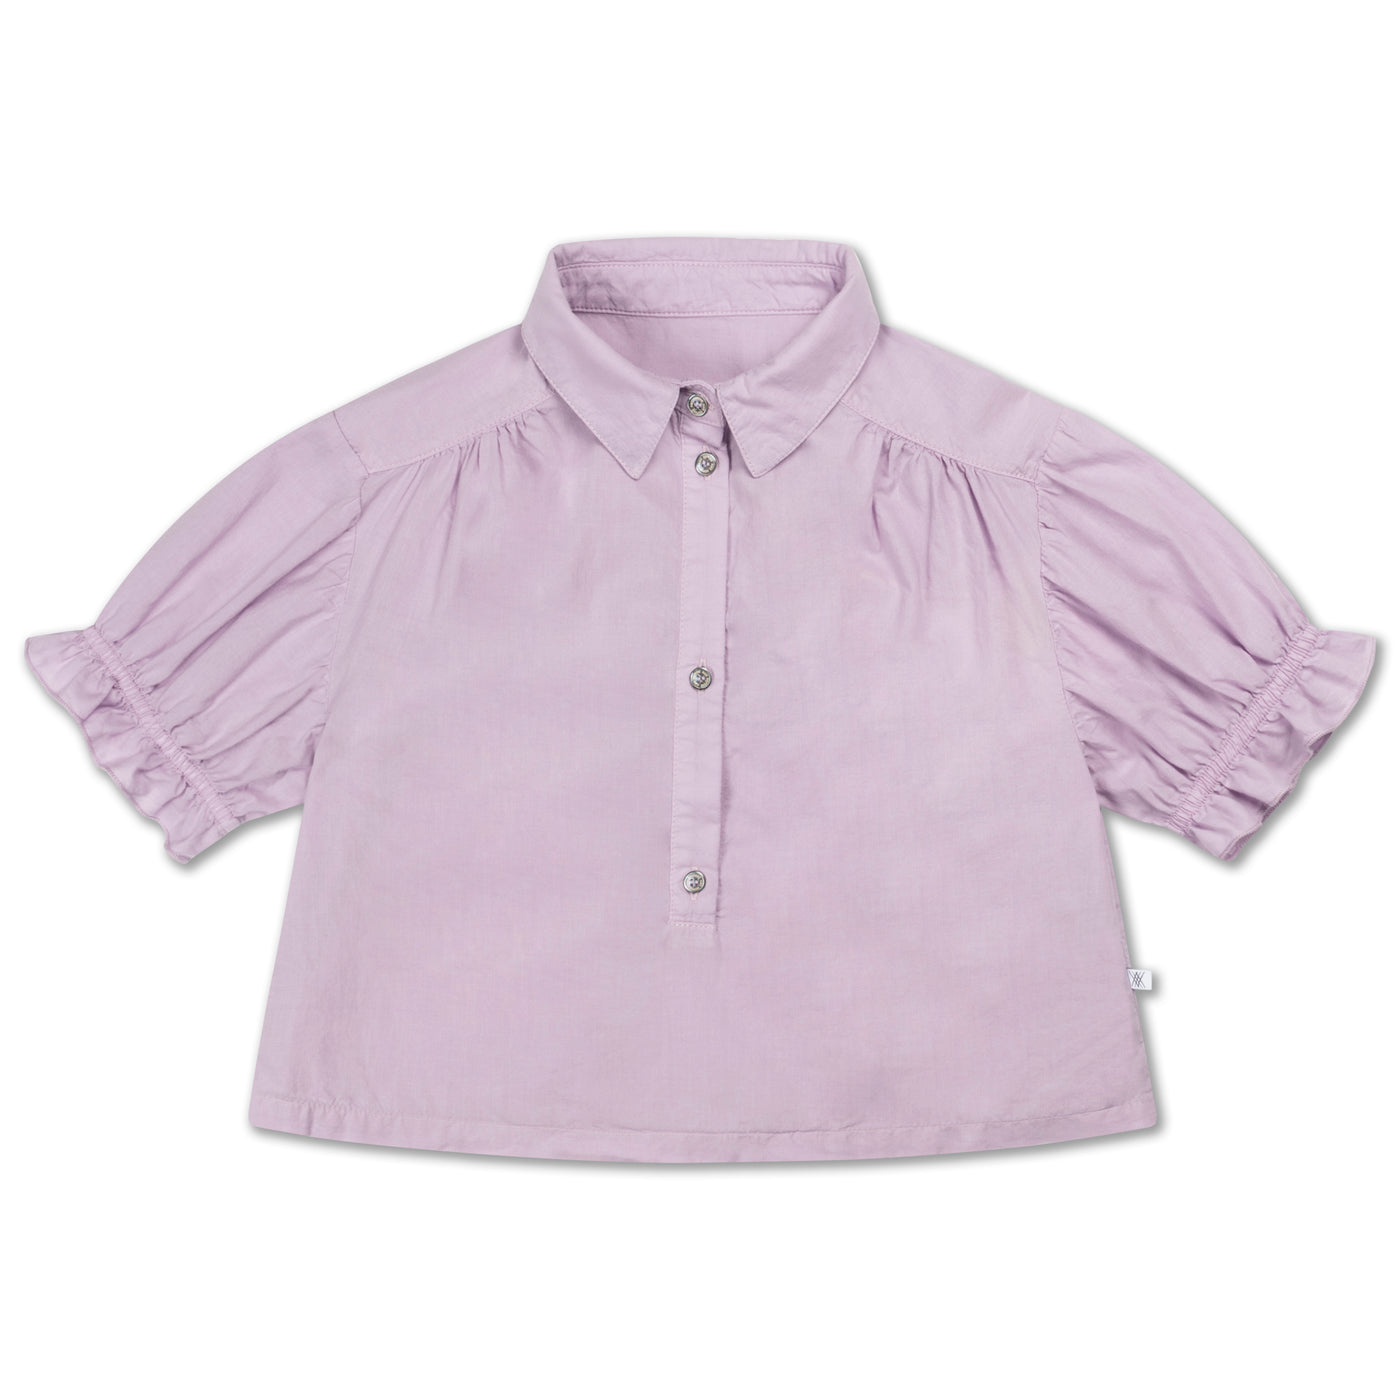 dreamy blouse - lilac frost